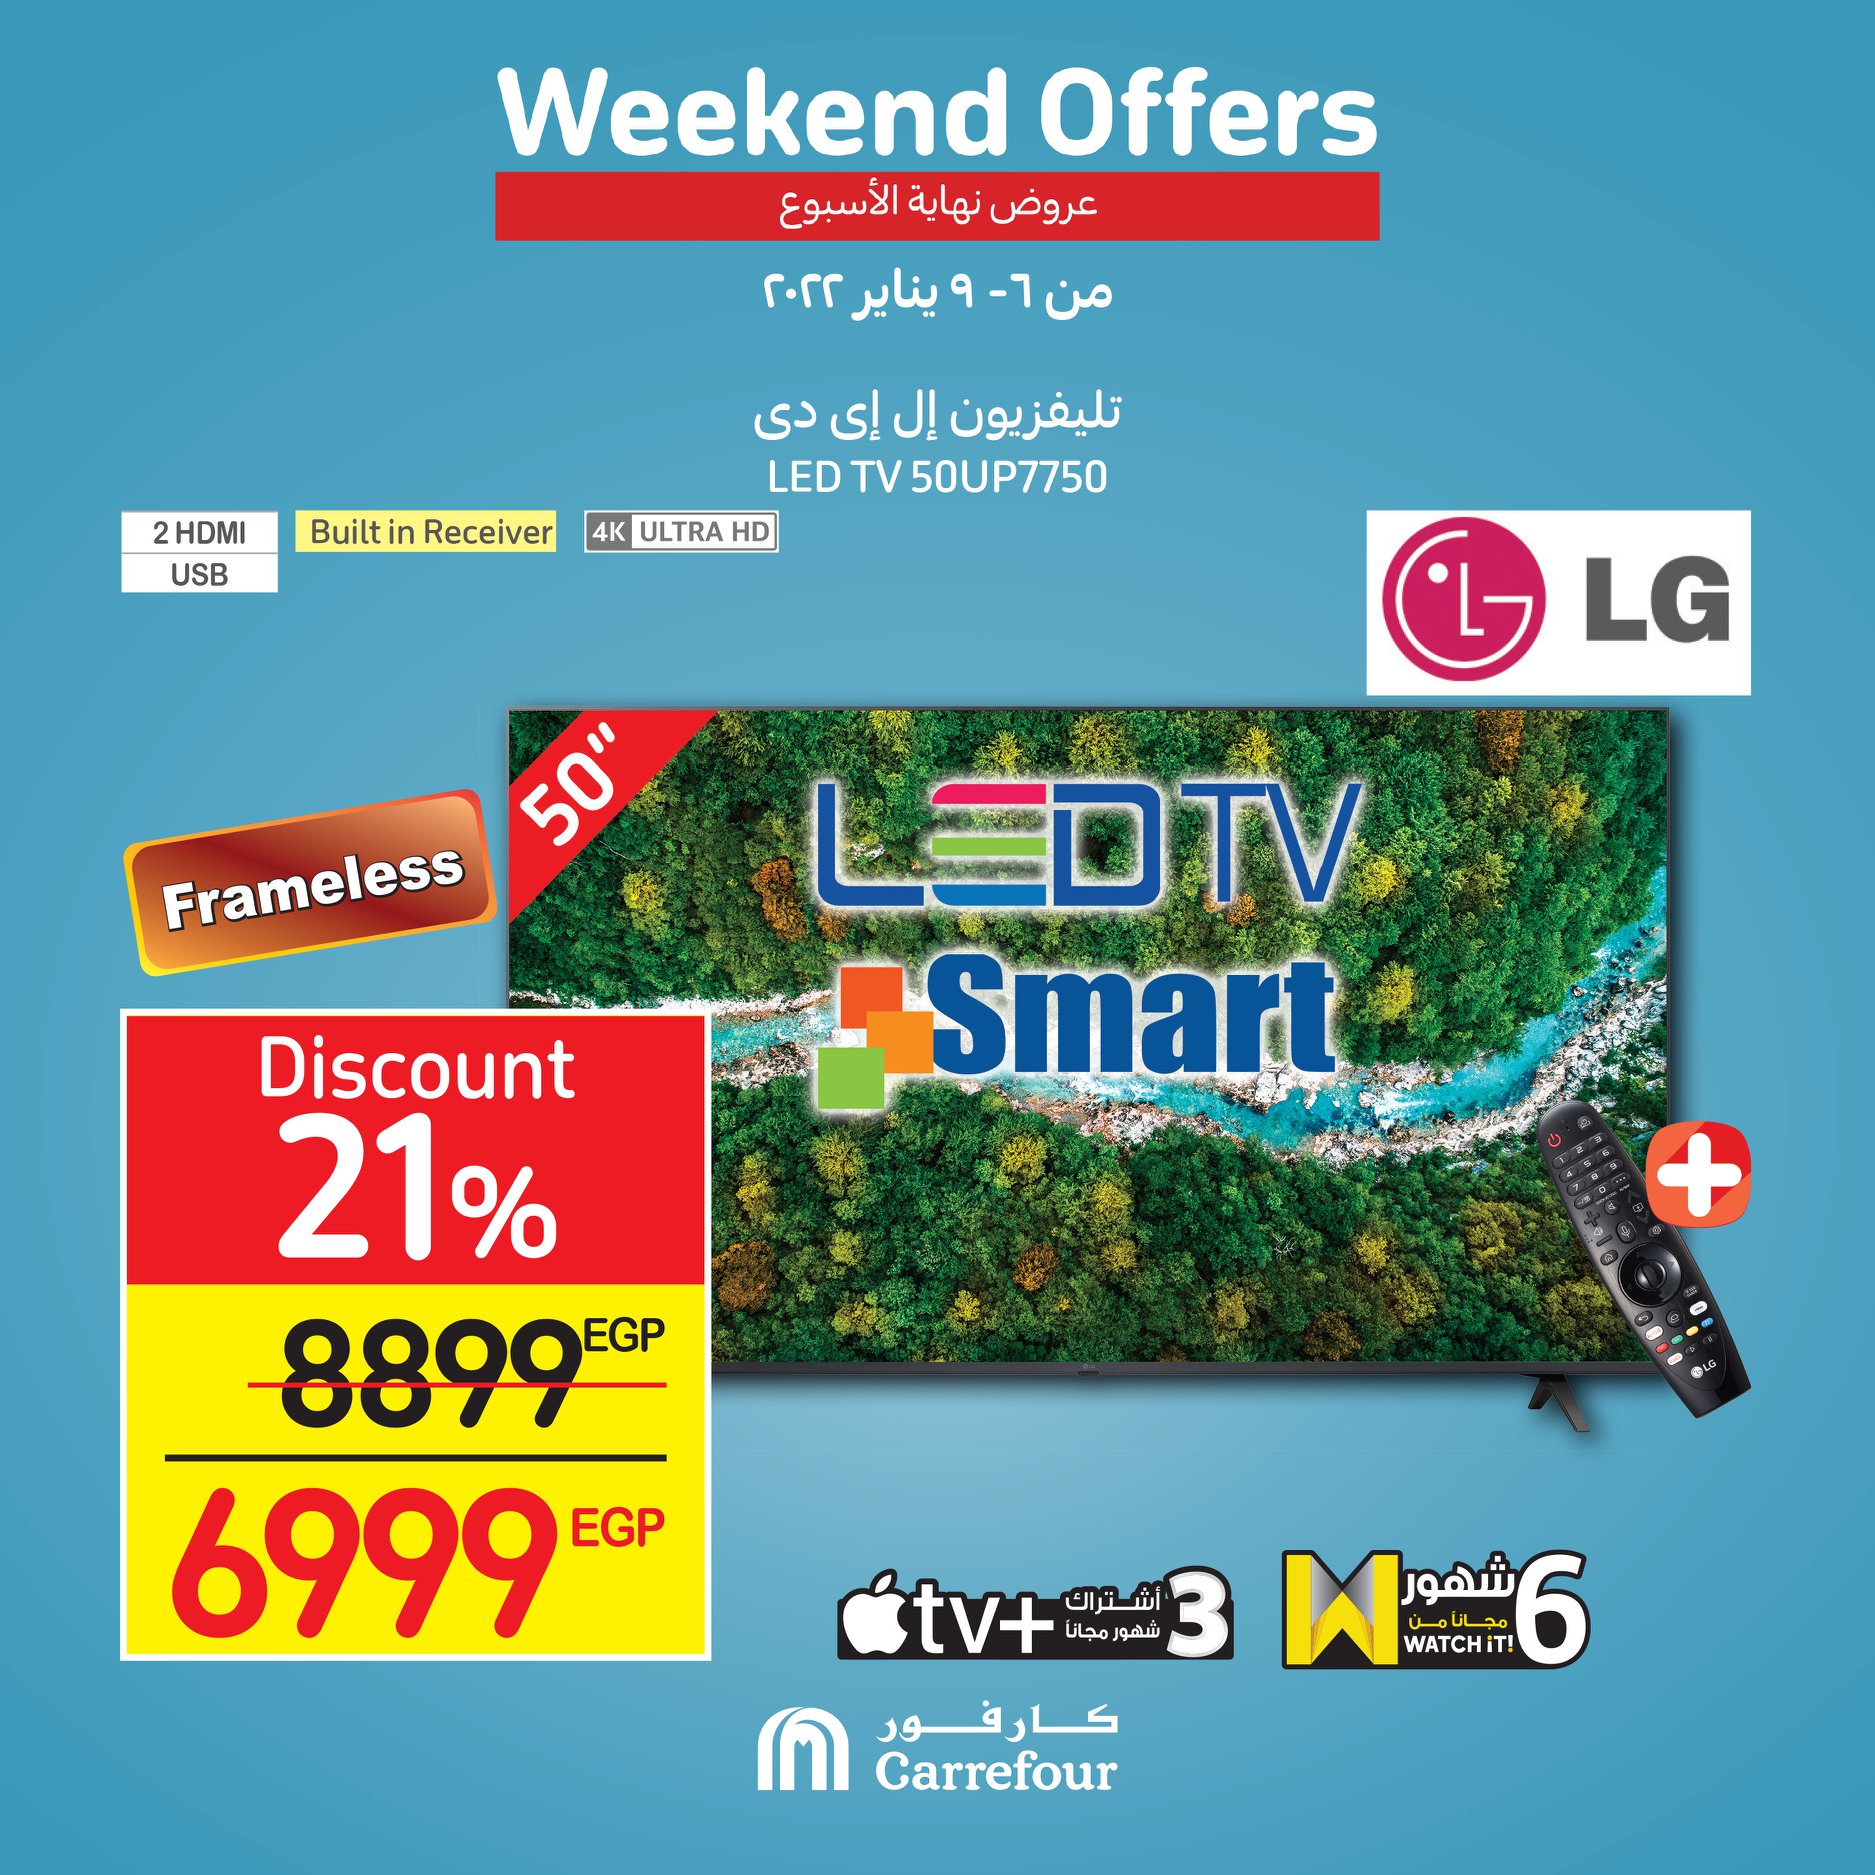 Now, the strongest offers and surprises from Carrefour, half-price discounts, at Weekend until January 16th, 5